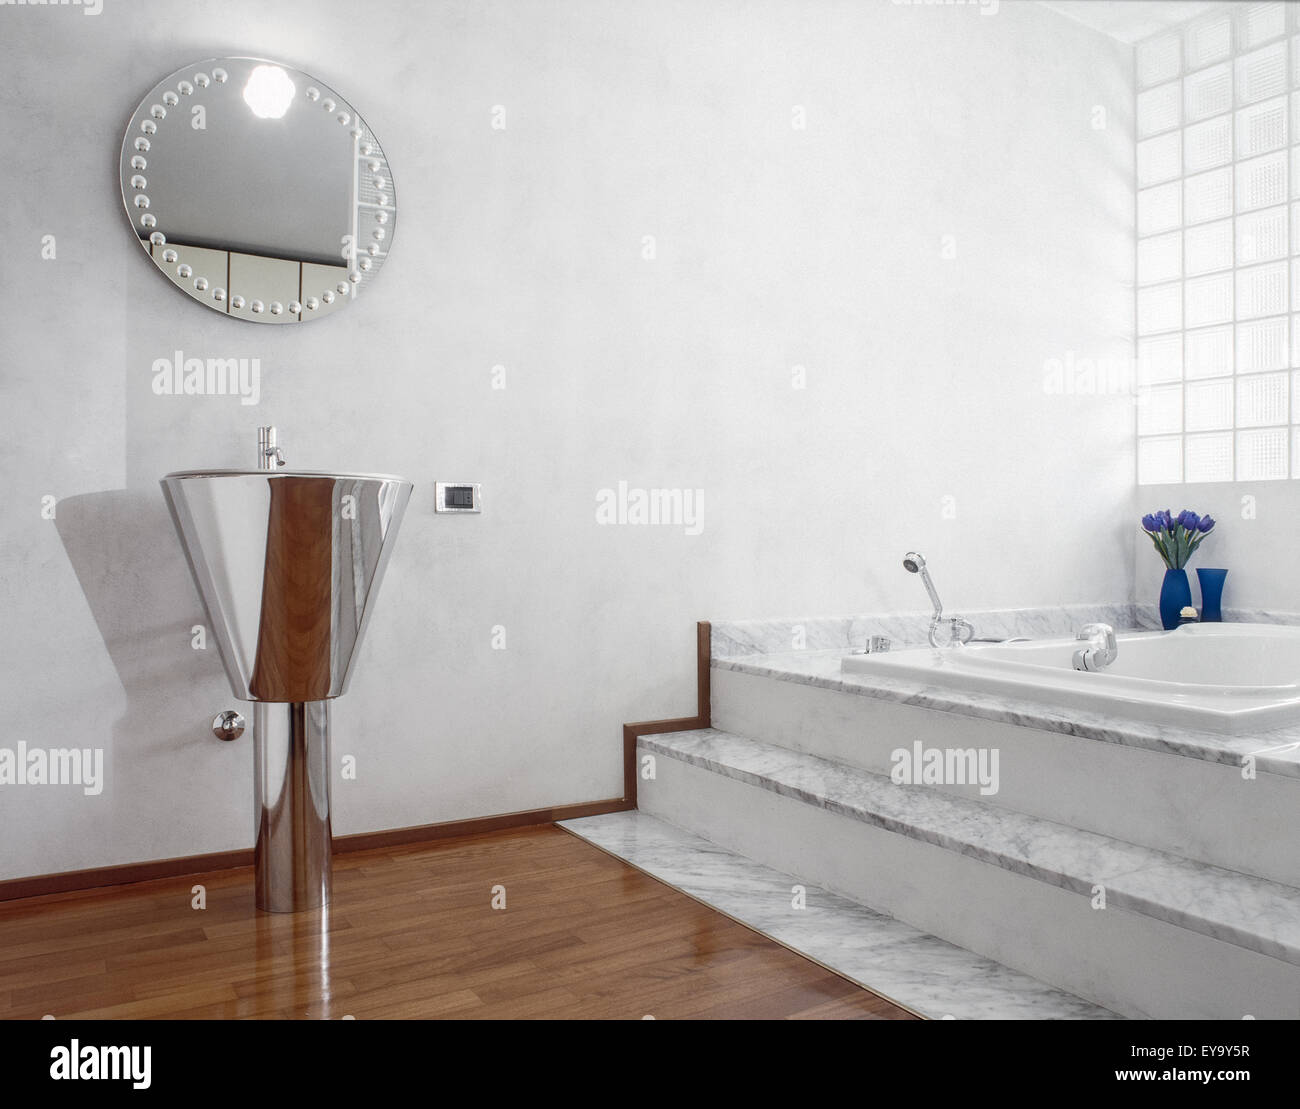 interior view of modern bathroom with steel washbasin and wood floor and glass block Stock Photo